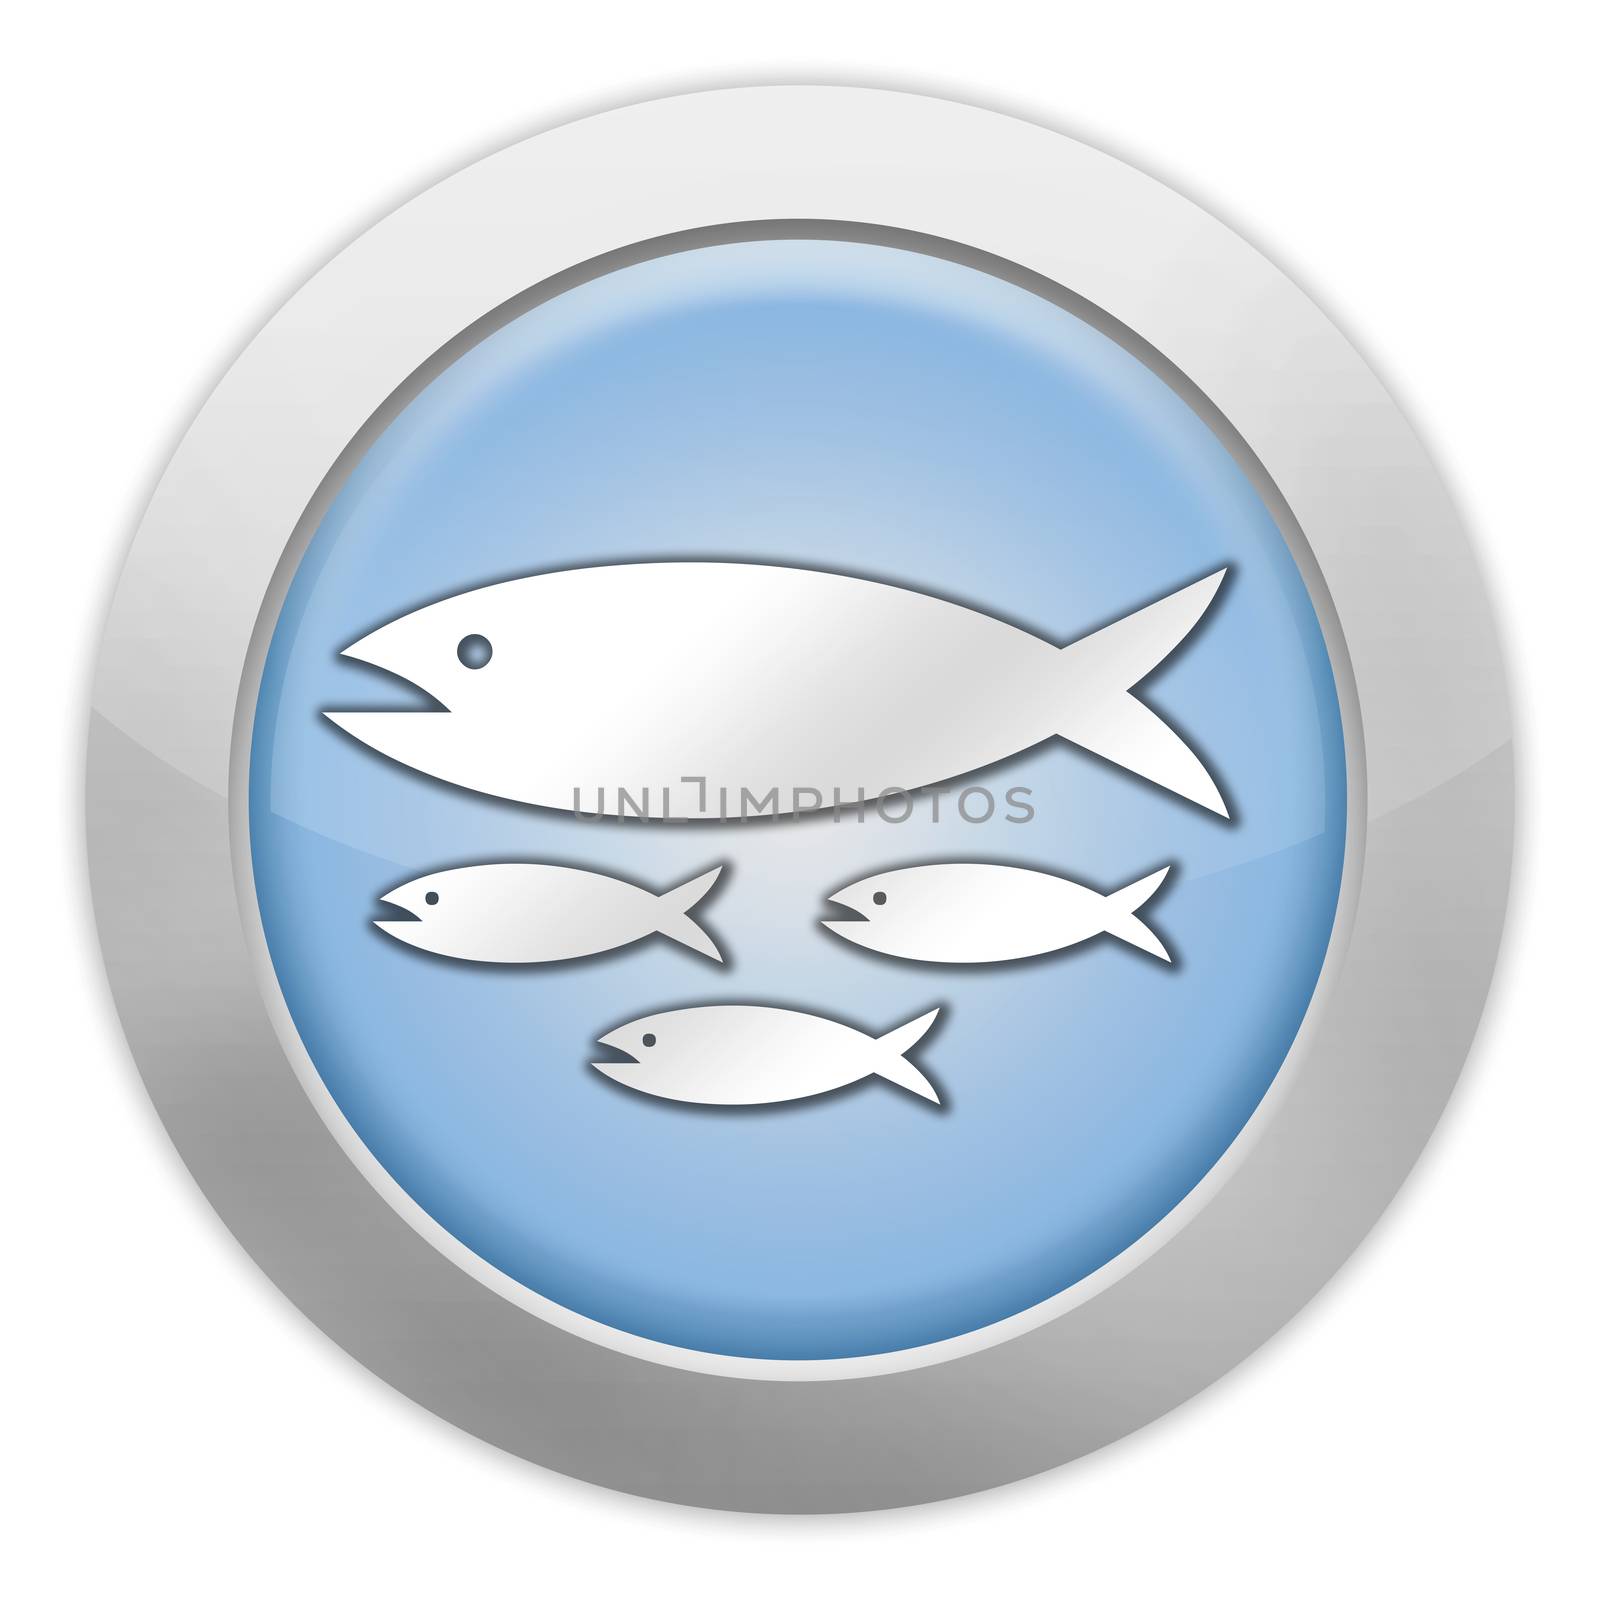 Icon, Button, Pictogram with Fish Hatchery symbol